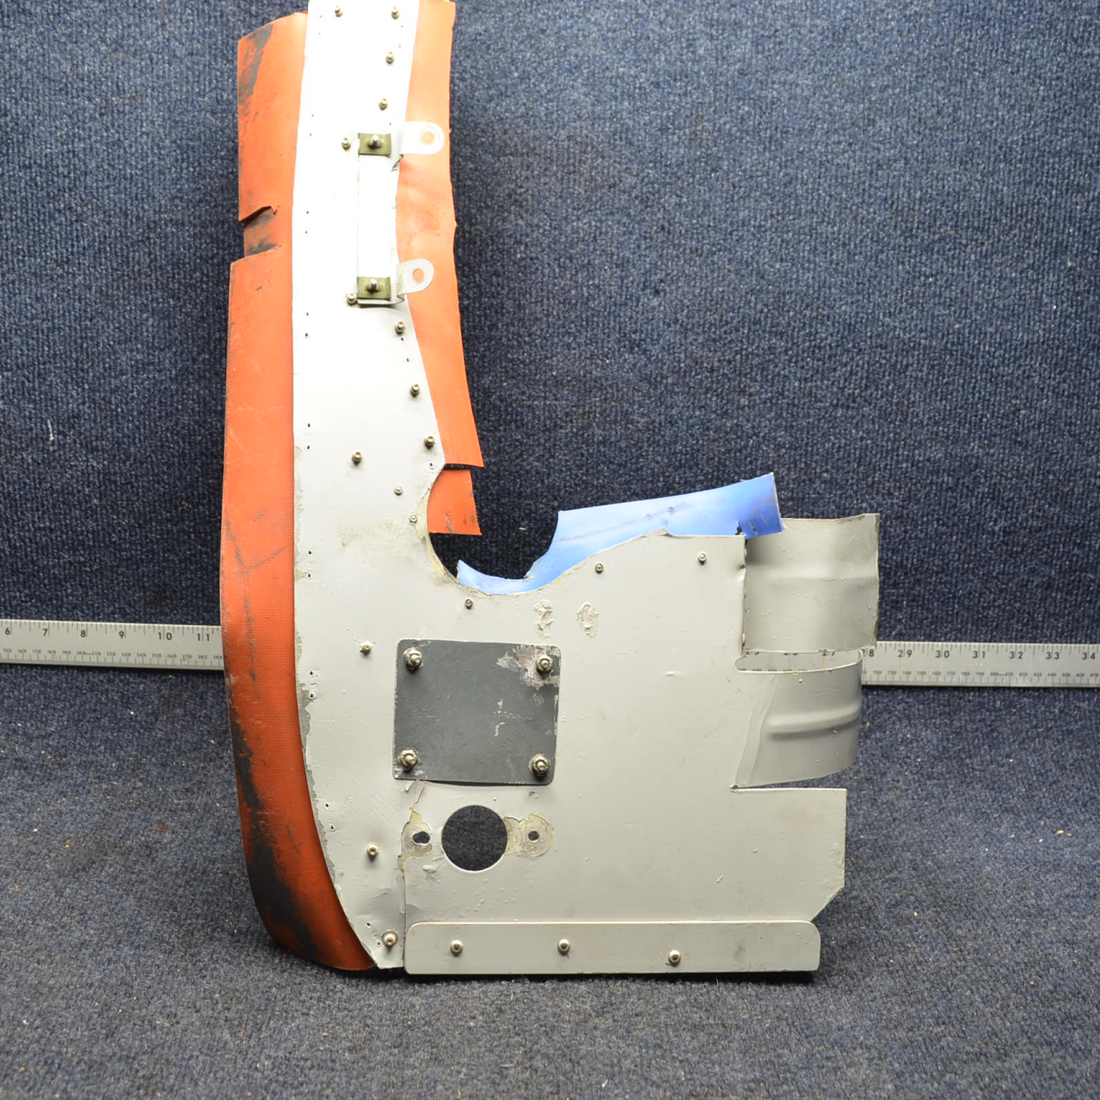 Used aircraft parts for sale, 502036-2 PIPER- CESSNA-BEECH- MOONEY VARIOS GRUMMAN LH REAR SIDE BAFFLE